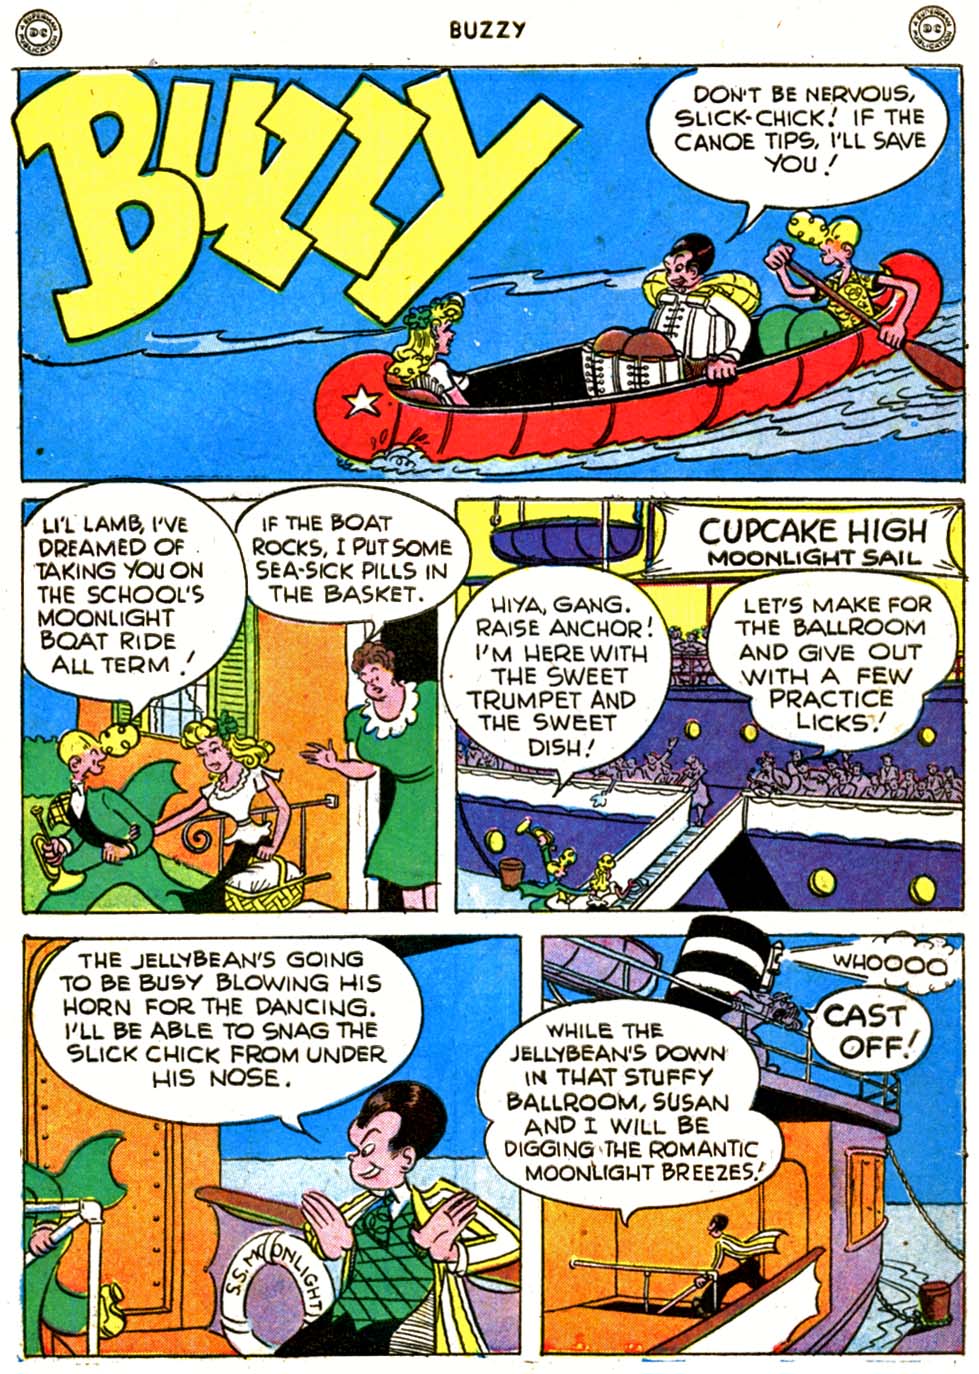 Read online Buzzy comic -  Issue #12 - 3